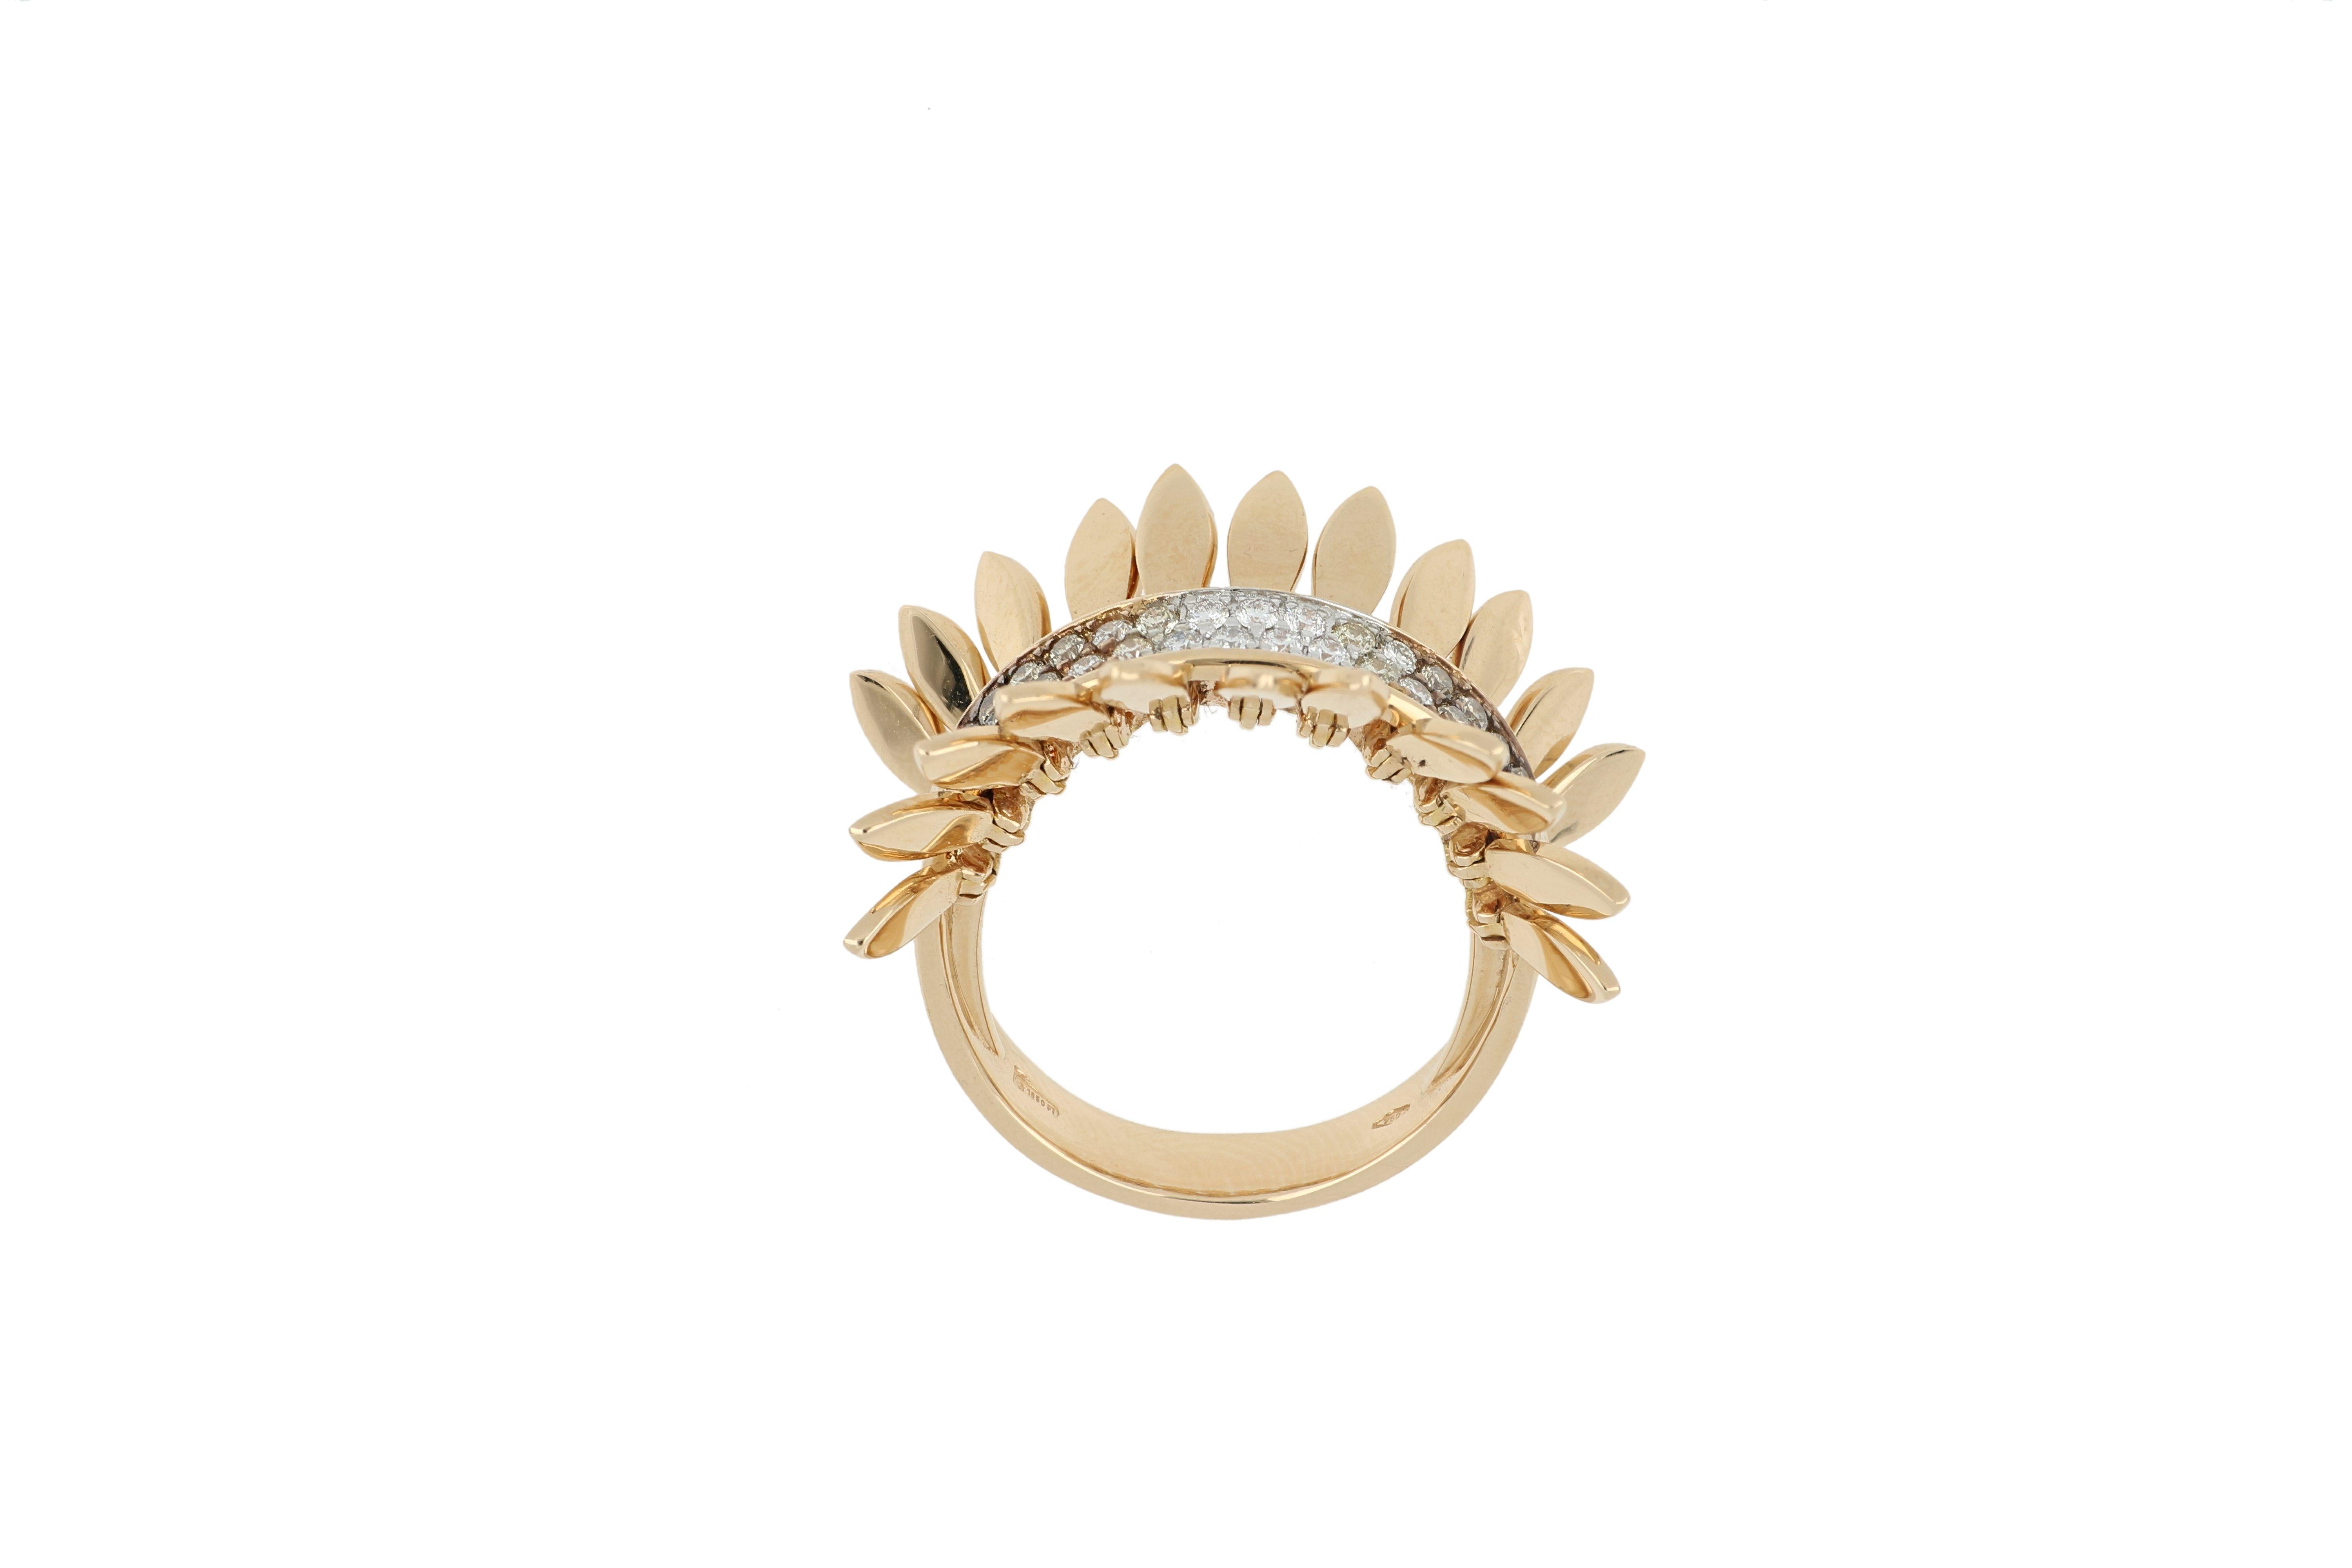 This gorgeous ring design in the Spettinato collection was inspired by techniques seen in hand knitting, macrame, and batik and wanting to toy with the concept of elegance. 18k rose gold, this stunning ring is adorned beautifully with white, crem